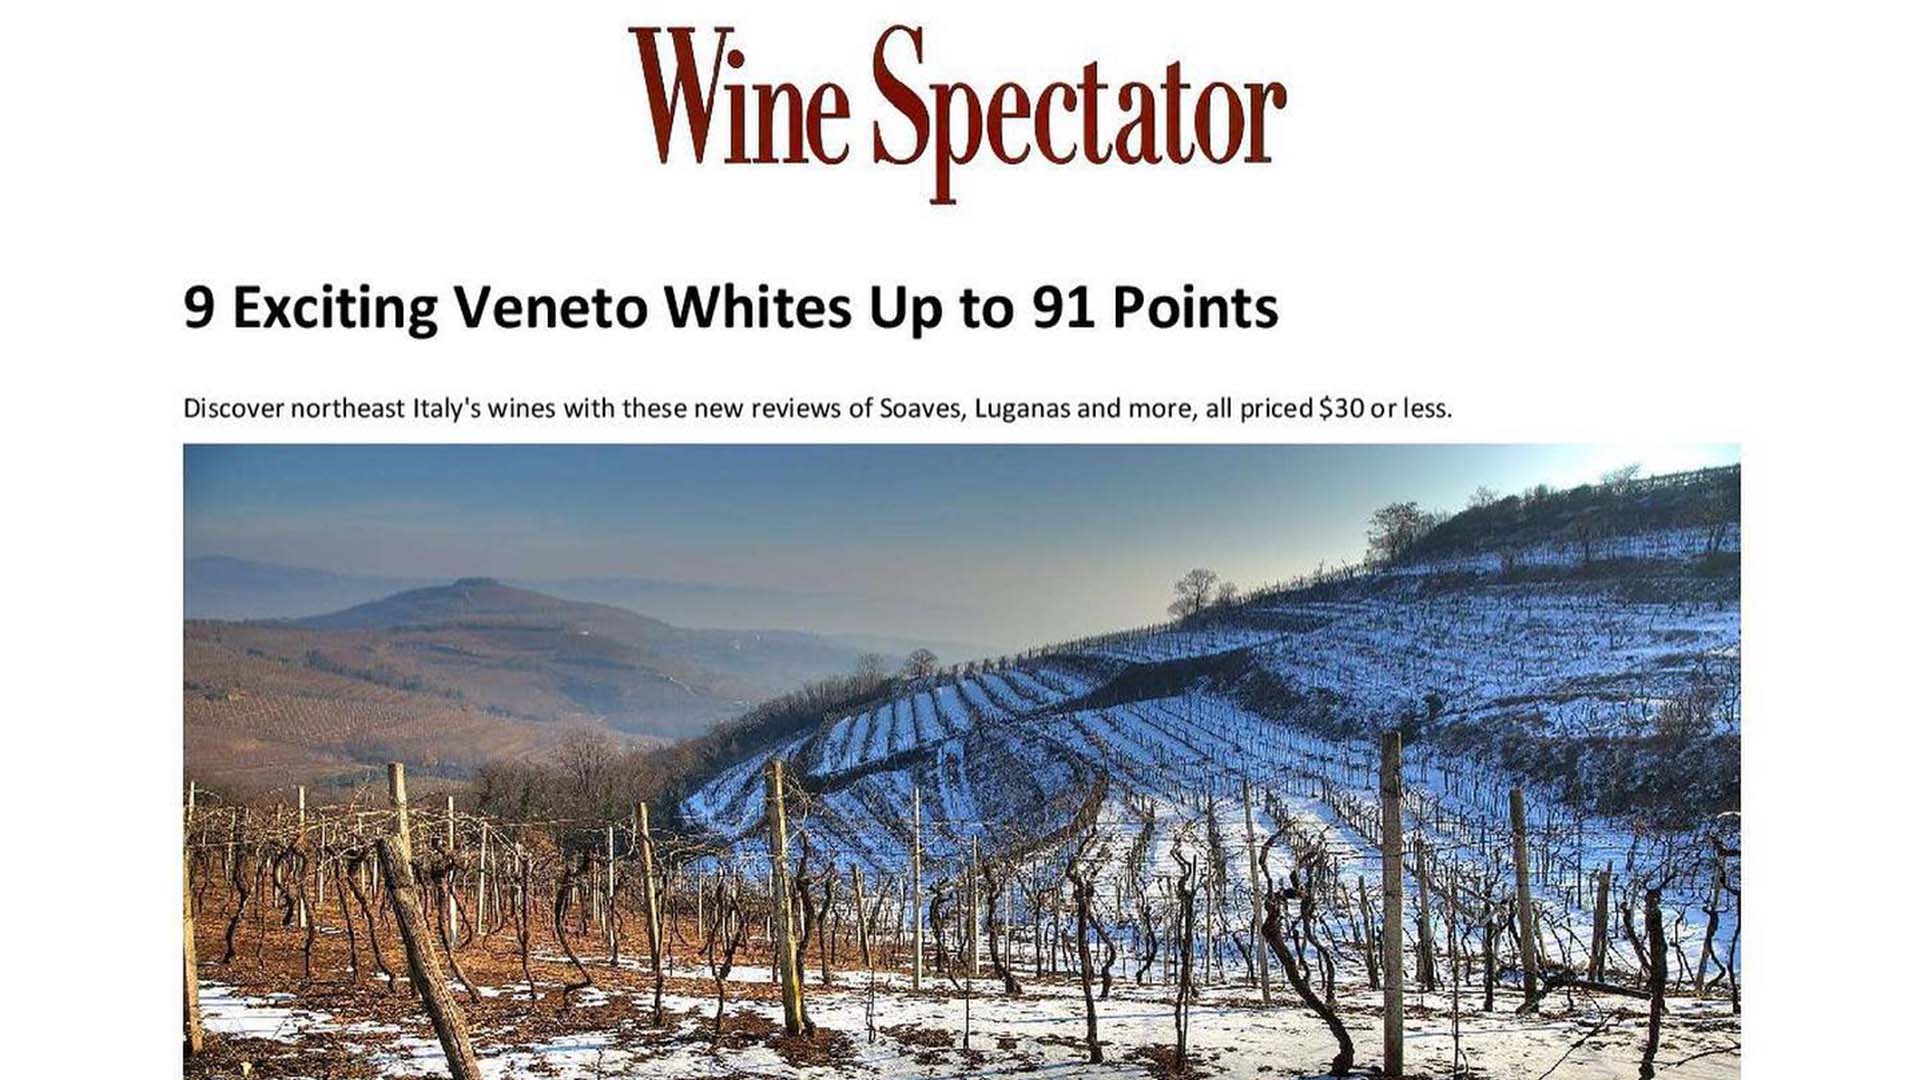 Cà del Magro 2019 selected among the 9 most exciting wines of Veneto by Wine Spectator